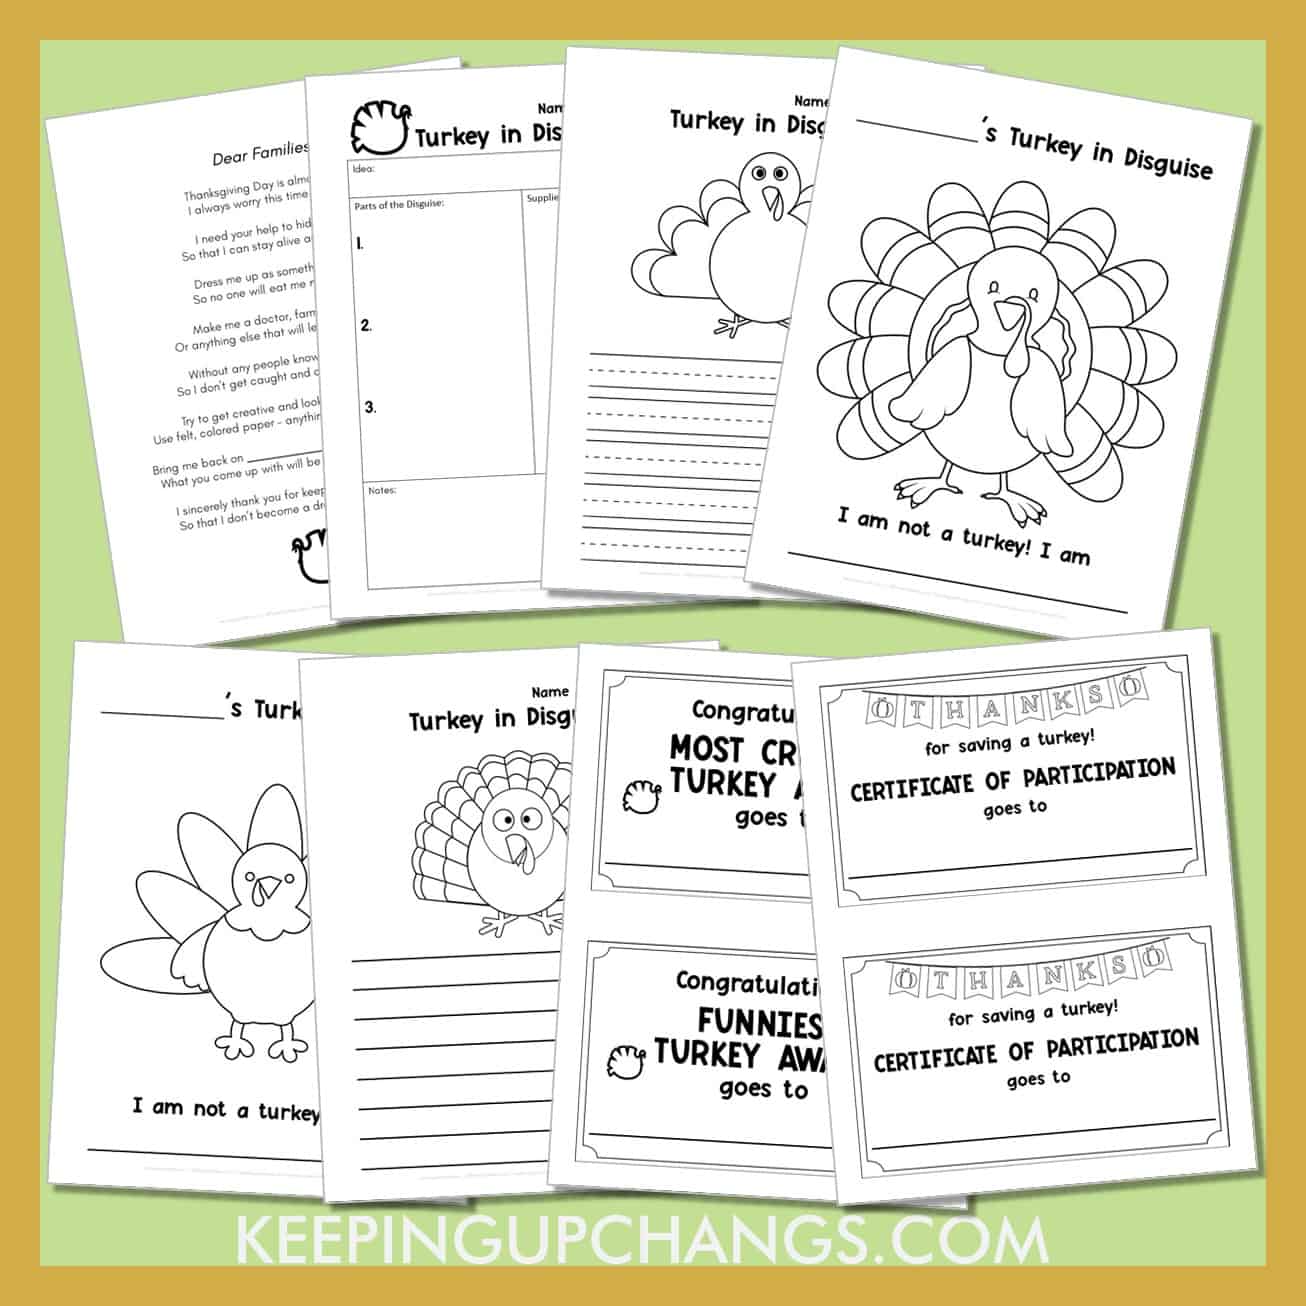 hide the turkey disguise project printables including activity templates, writing worksheets, awards, voting, and more.